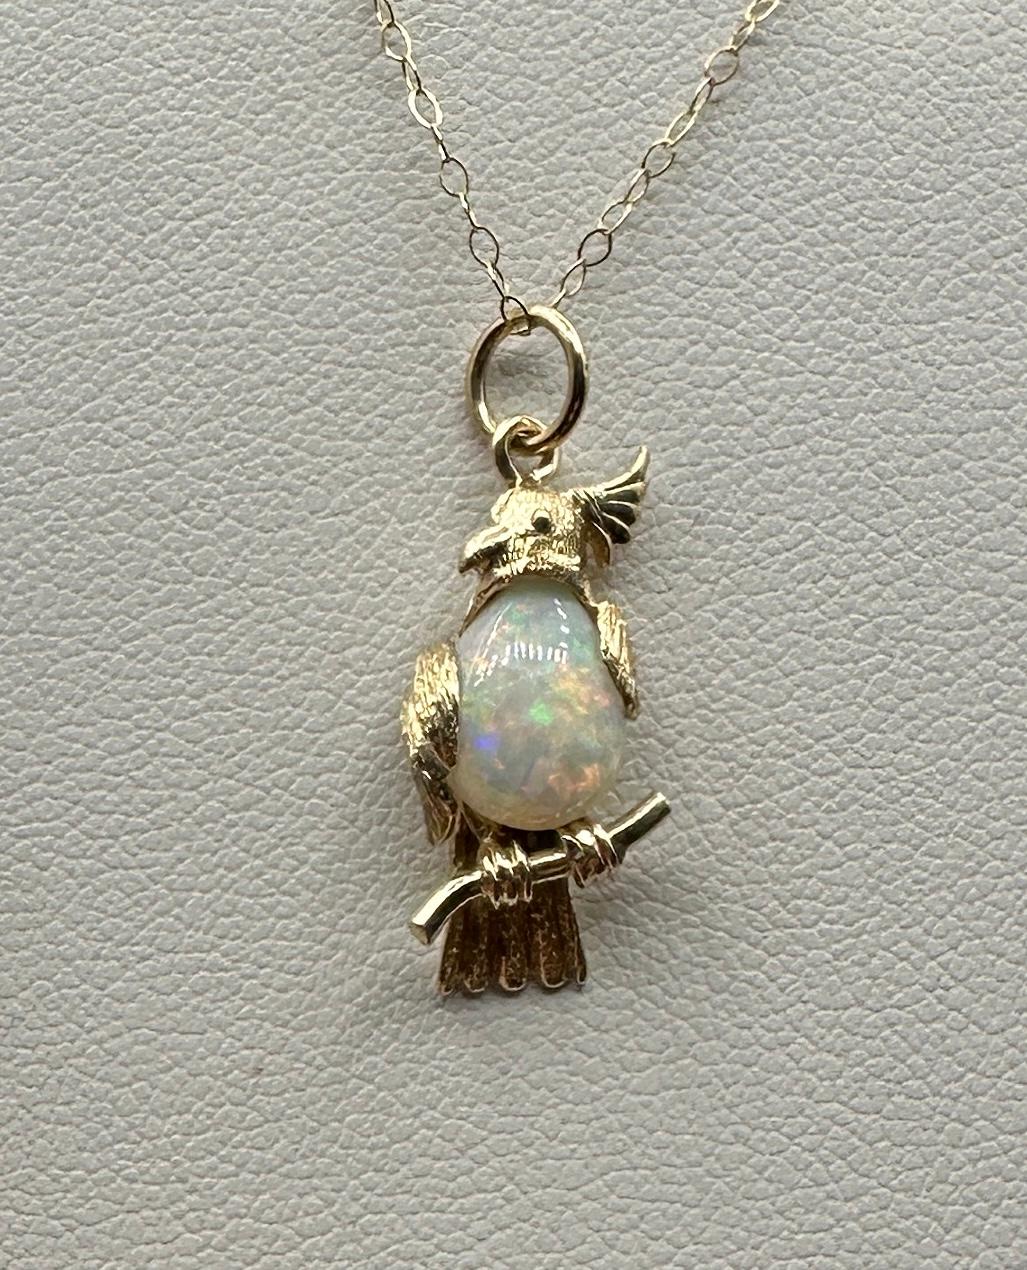 This is a wonderful pendant or charm with a fabulous Parrot or Cockatoo Bird sitting on its perch with a gorgeous pear shape fire opal body.  The pendant is 14 Karat yellow gold.  The radiant pear shape opal is full of fire with blue, green, orange,